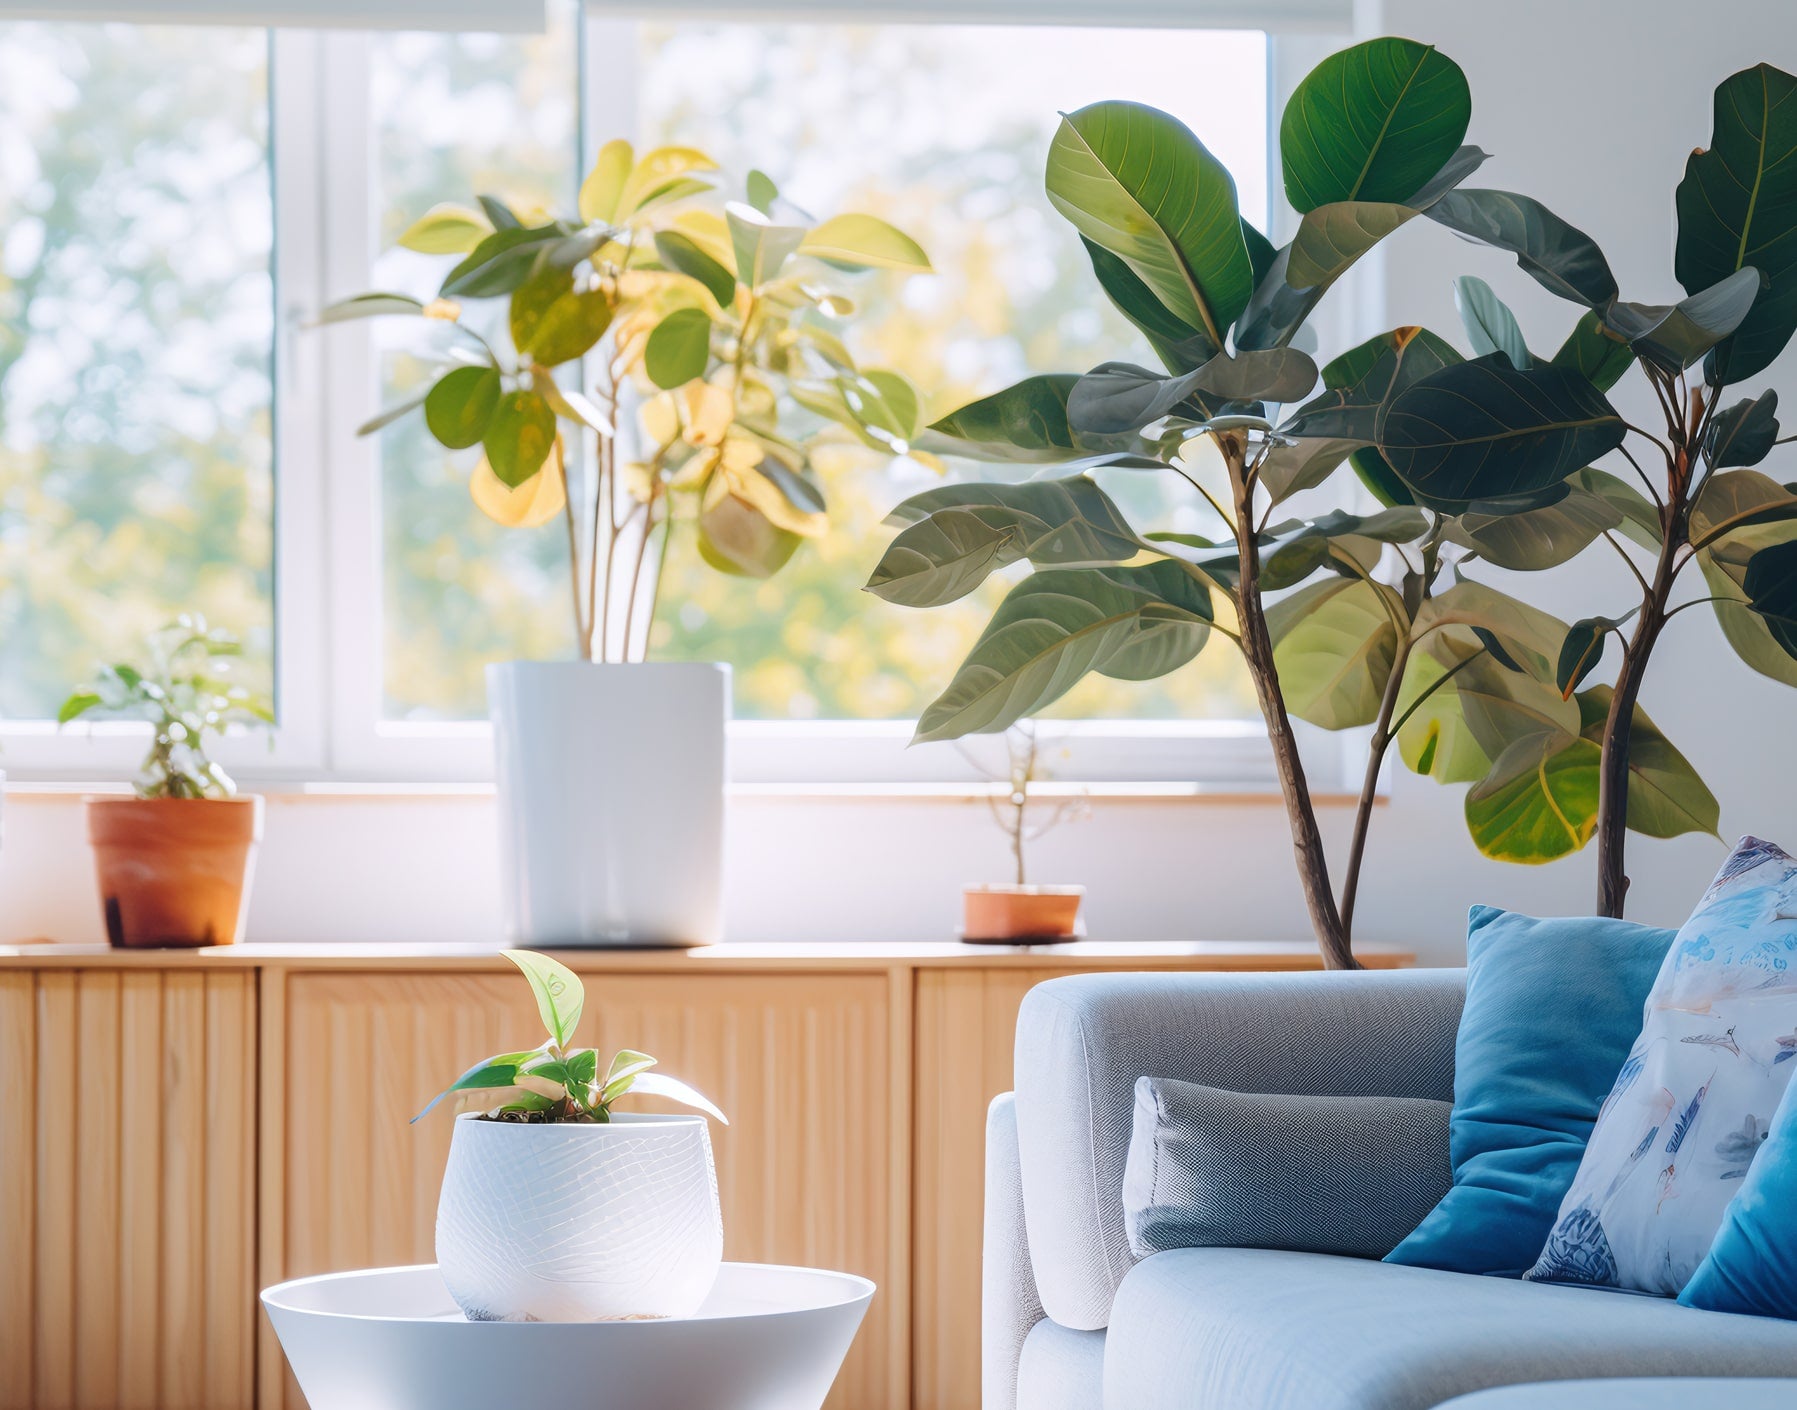 warm minimalist interior spaces with vibrant houseplants natural light